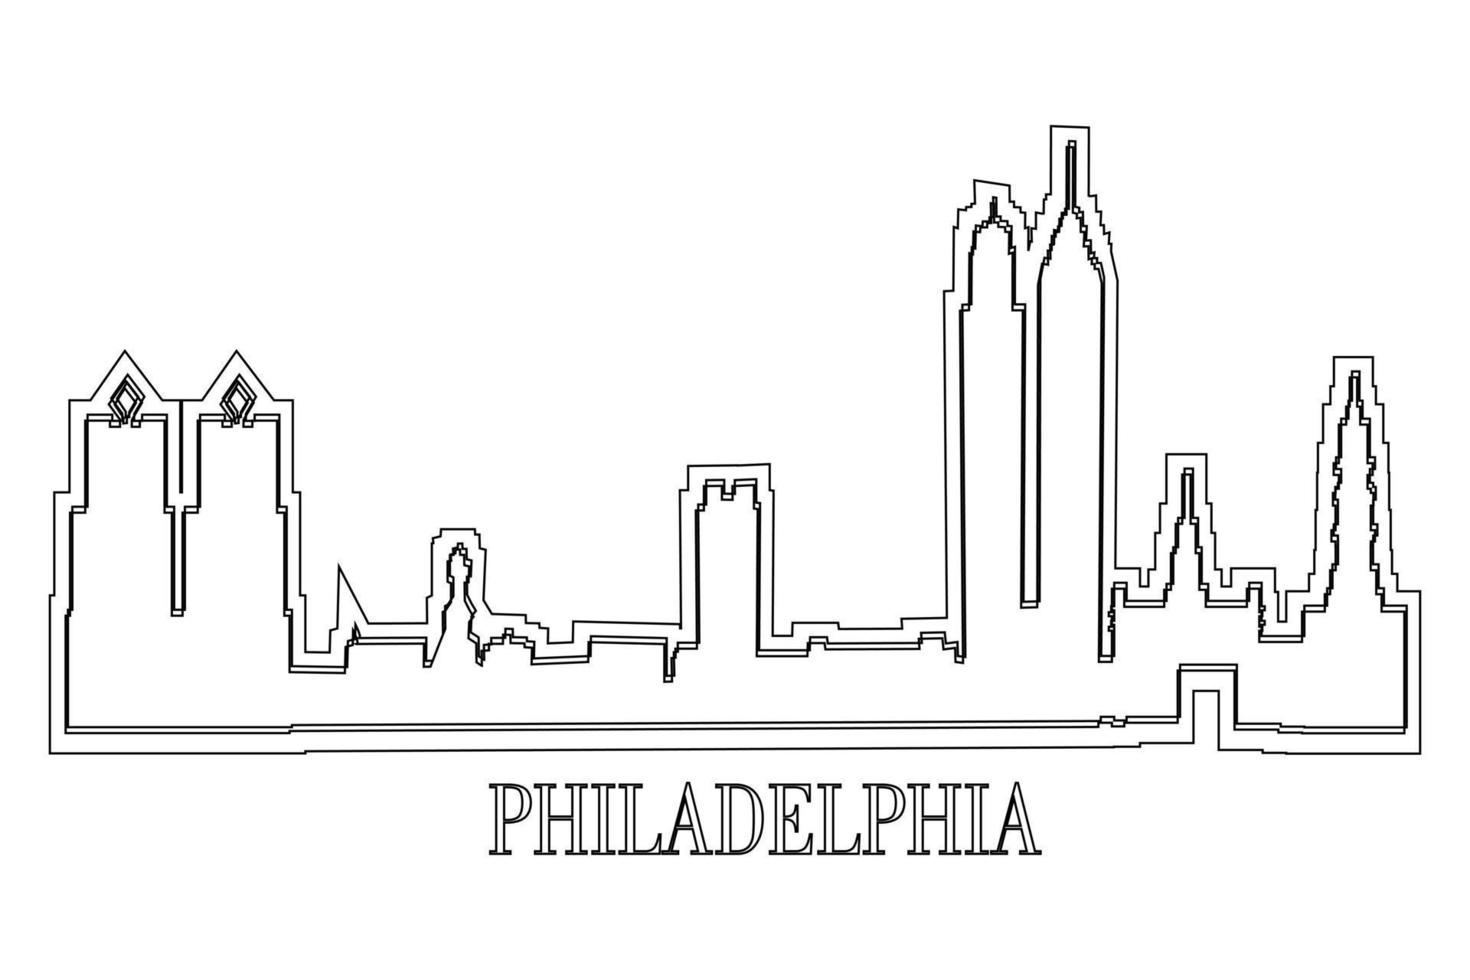 Philadelphia skyline drawing. Vector illustration of landmarks and city for printing or travel advertising concept.